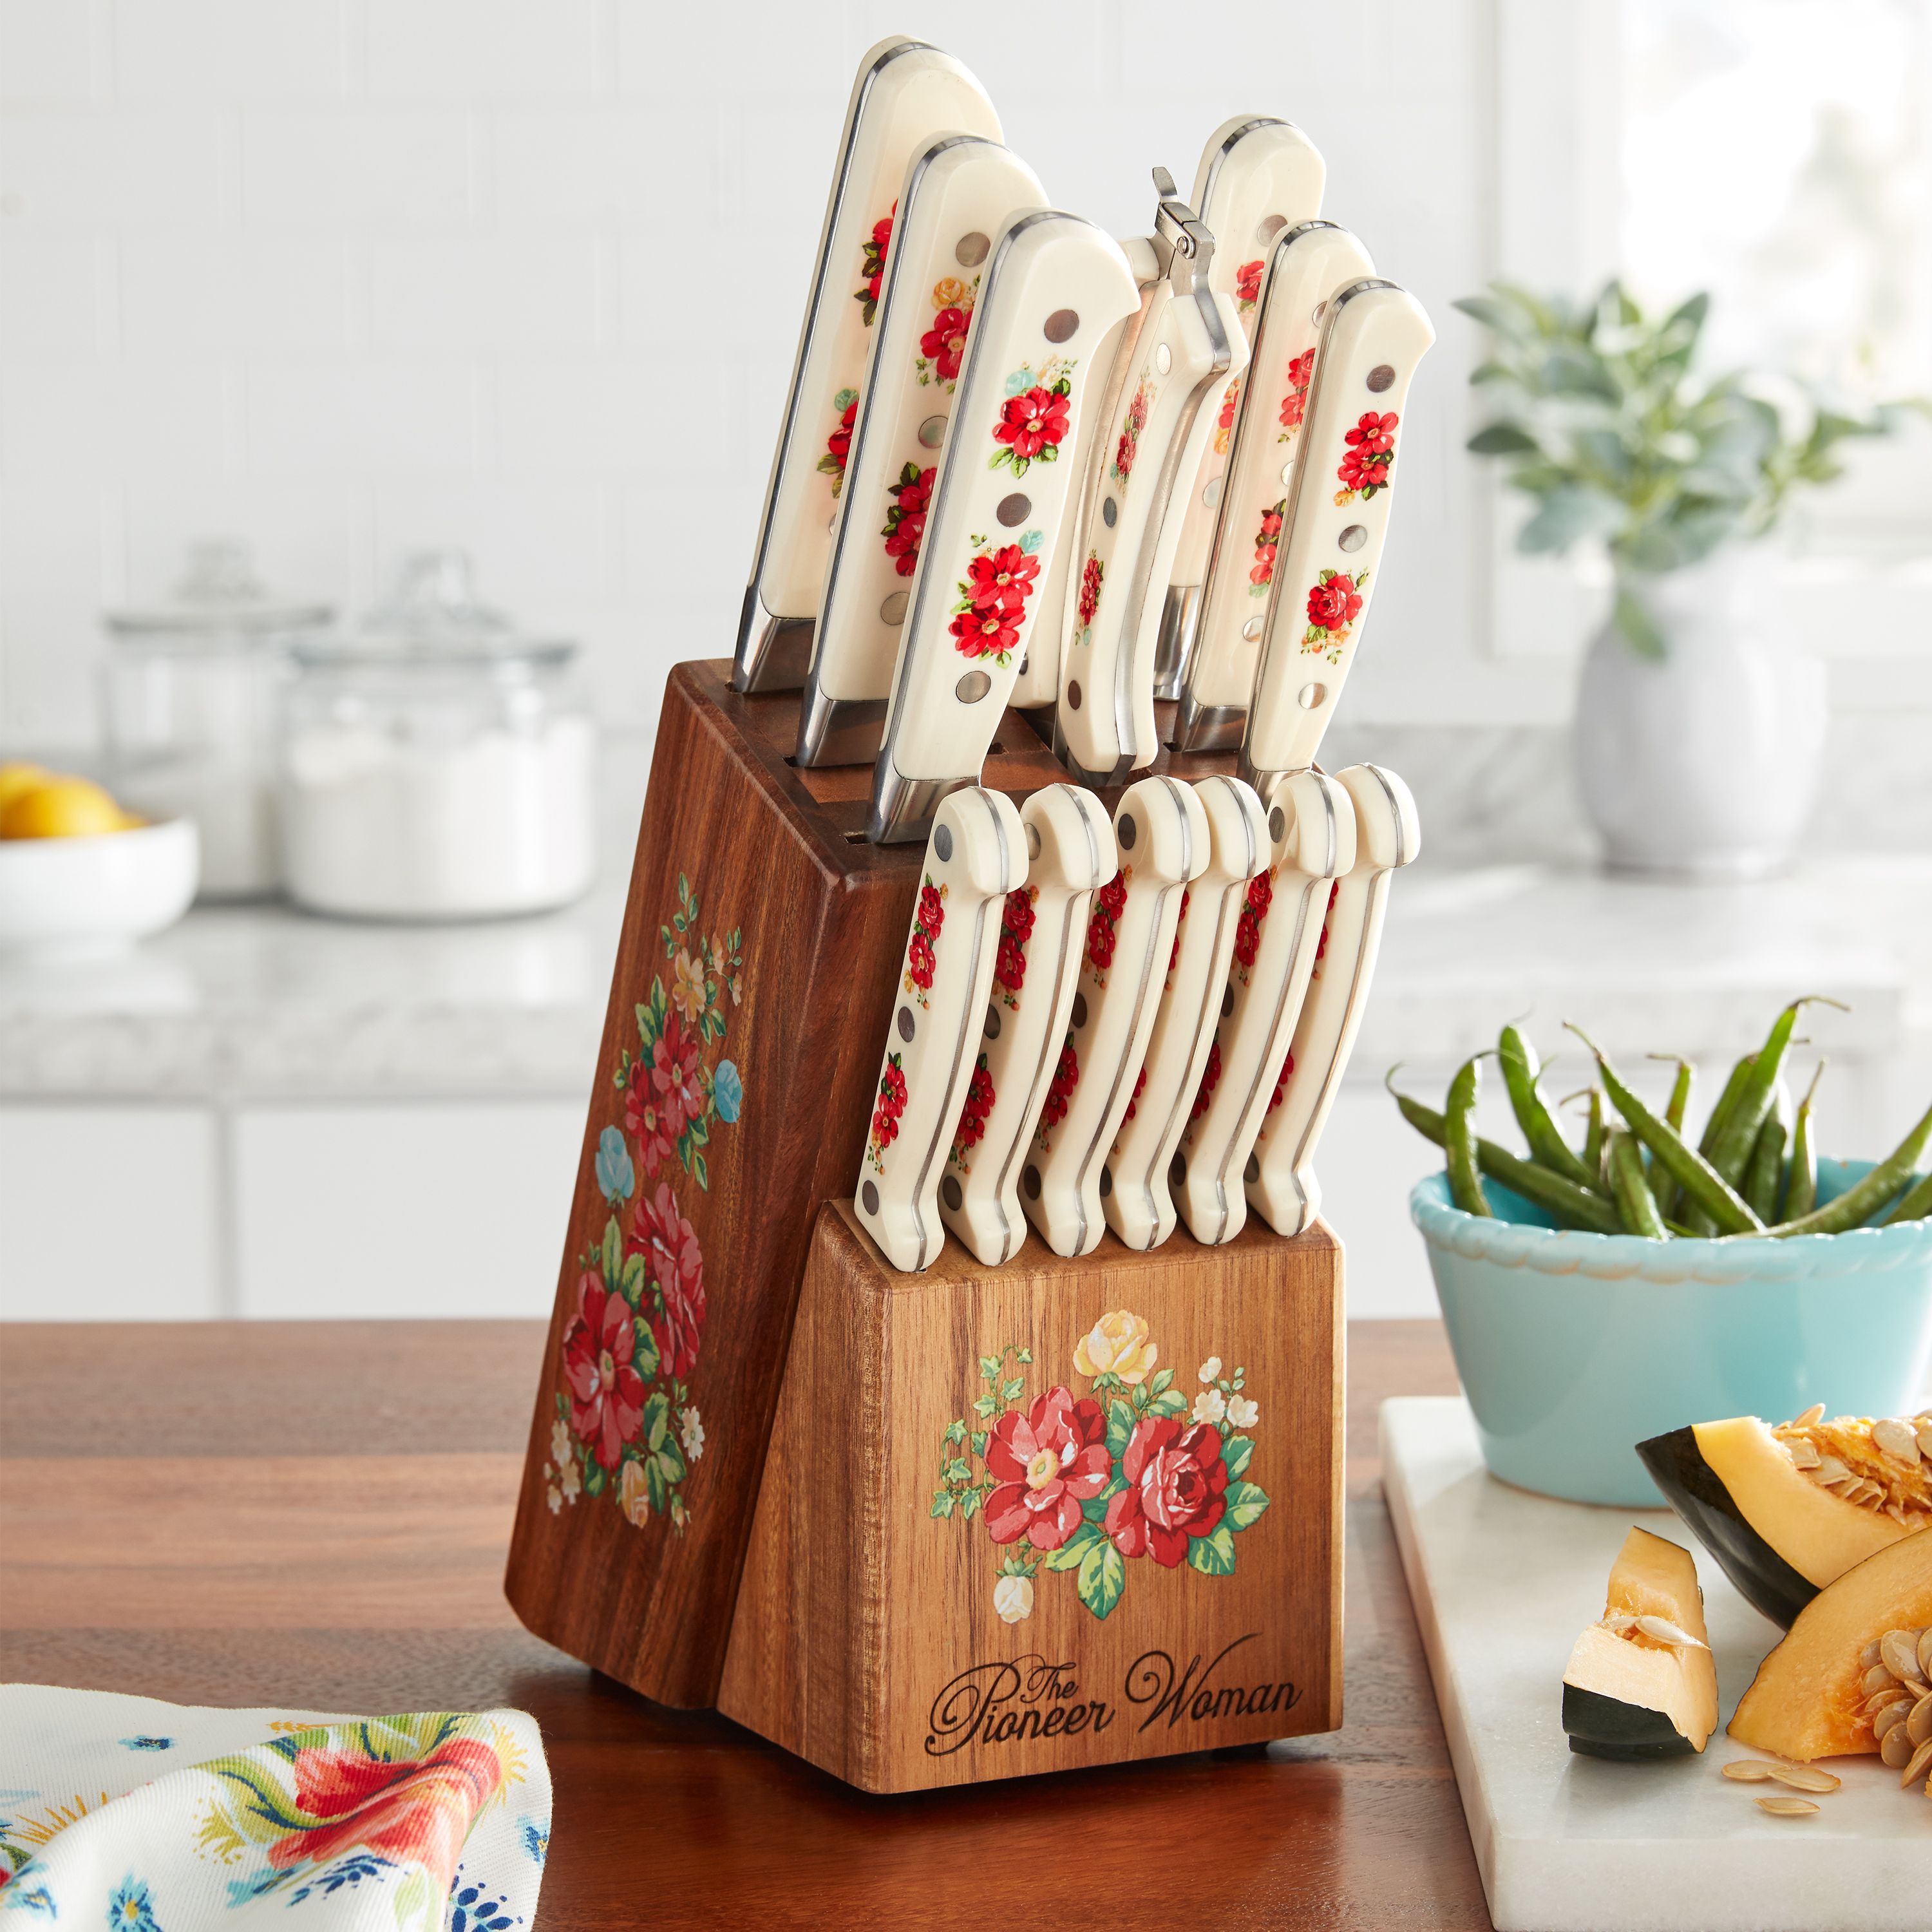 Brighten Your Day Giveaway #4: Pioneer Woman Knife Sets!